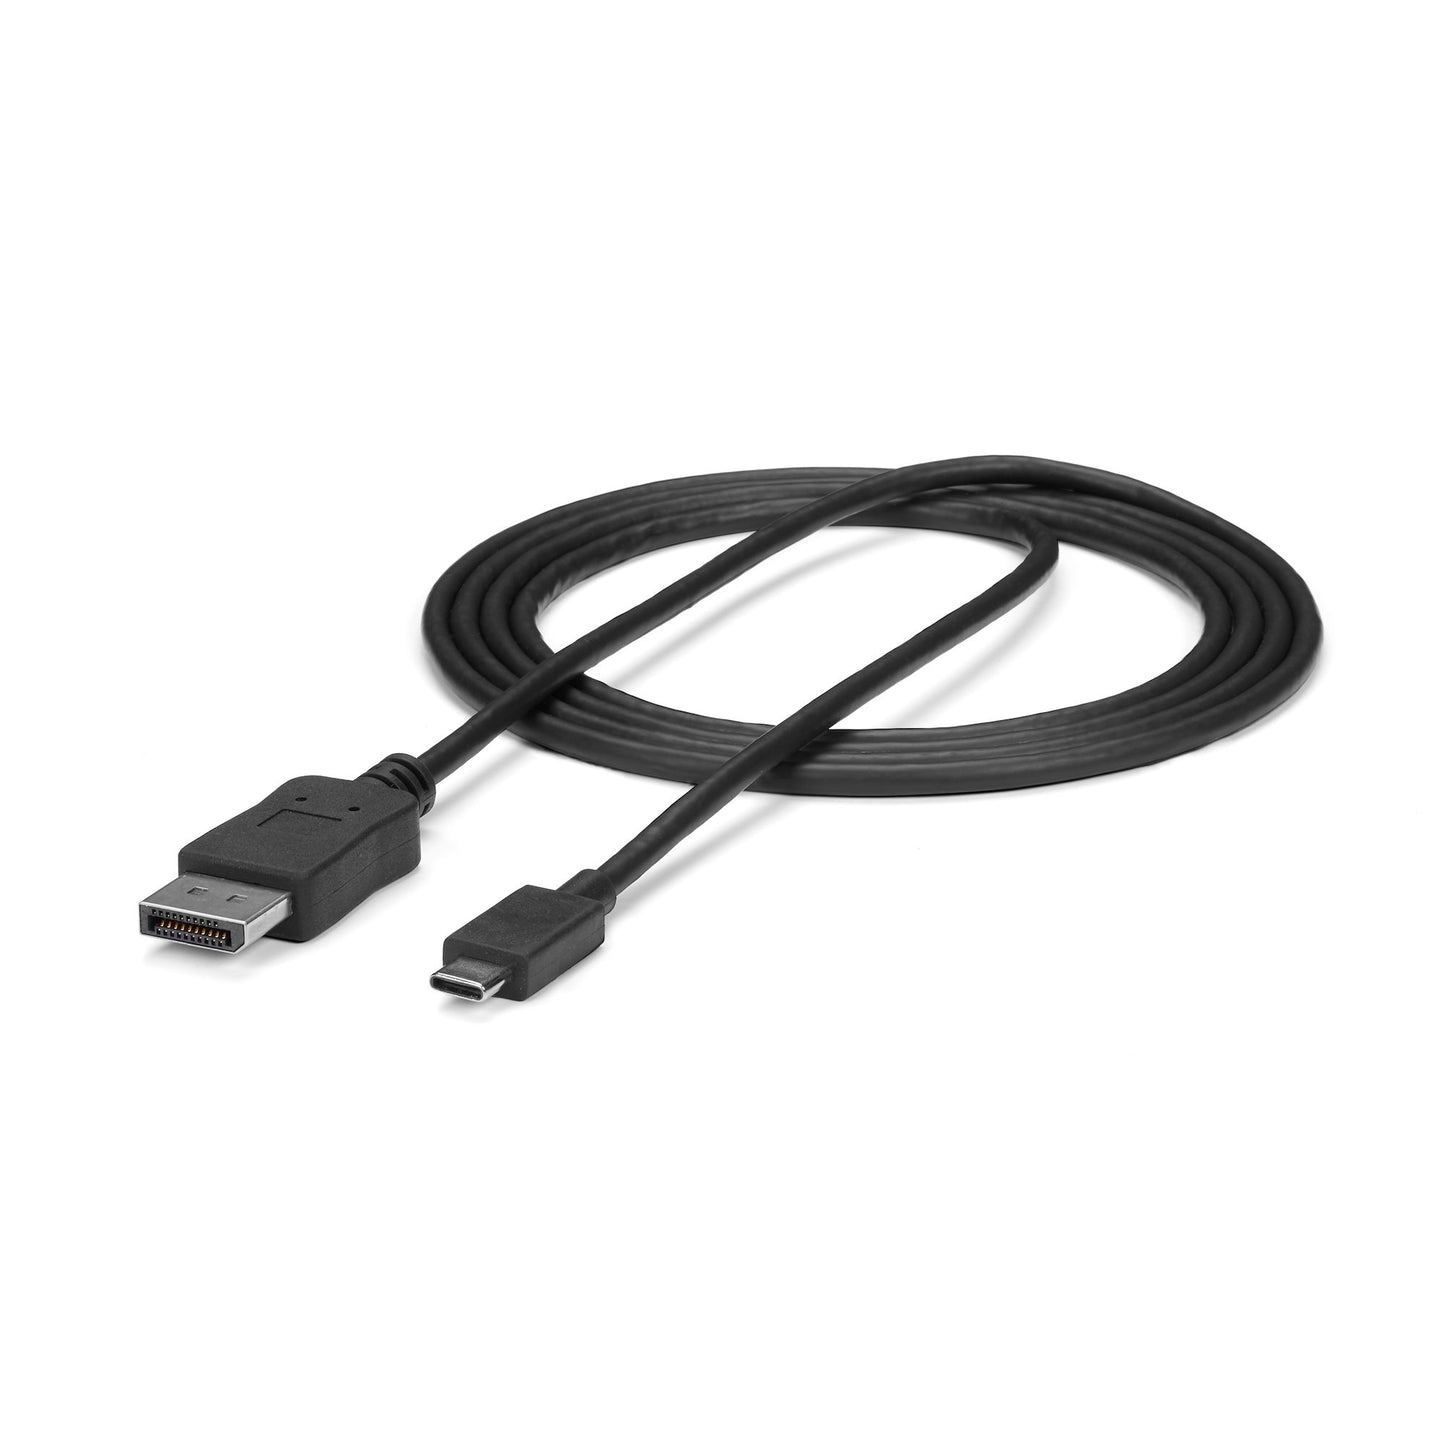 StarTech.com 6ft/1.8m USB C to DisplayPort 1.2 Cable 4K 60Hz - USB-C to DisplayPort Adapter Cable HBR2 - USB Type-C DP Alt Mode to DP Monitor Video Cable - Works w/ Thunderbolt 3 - Black-3